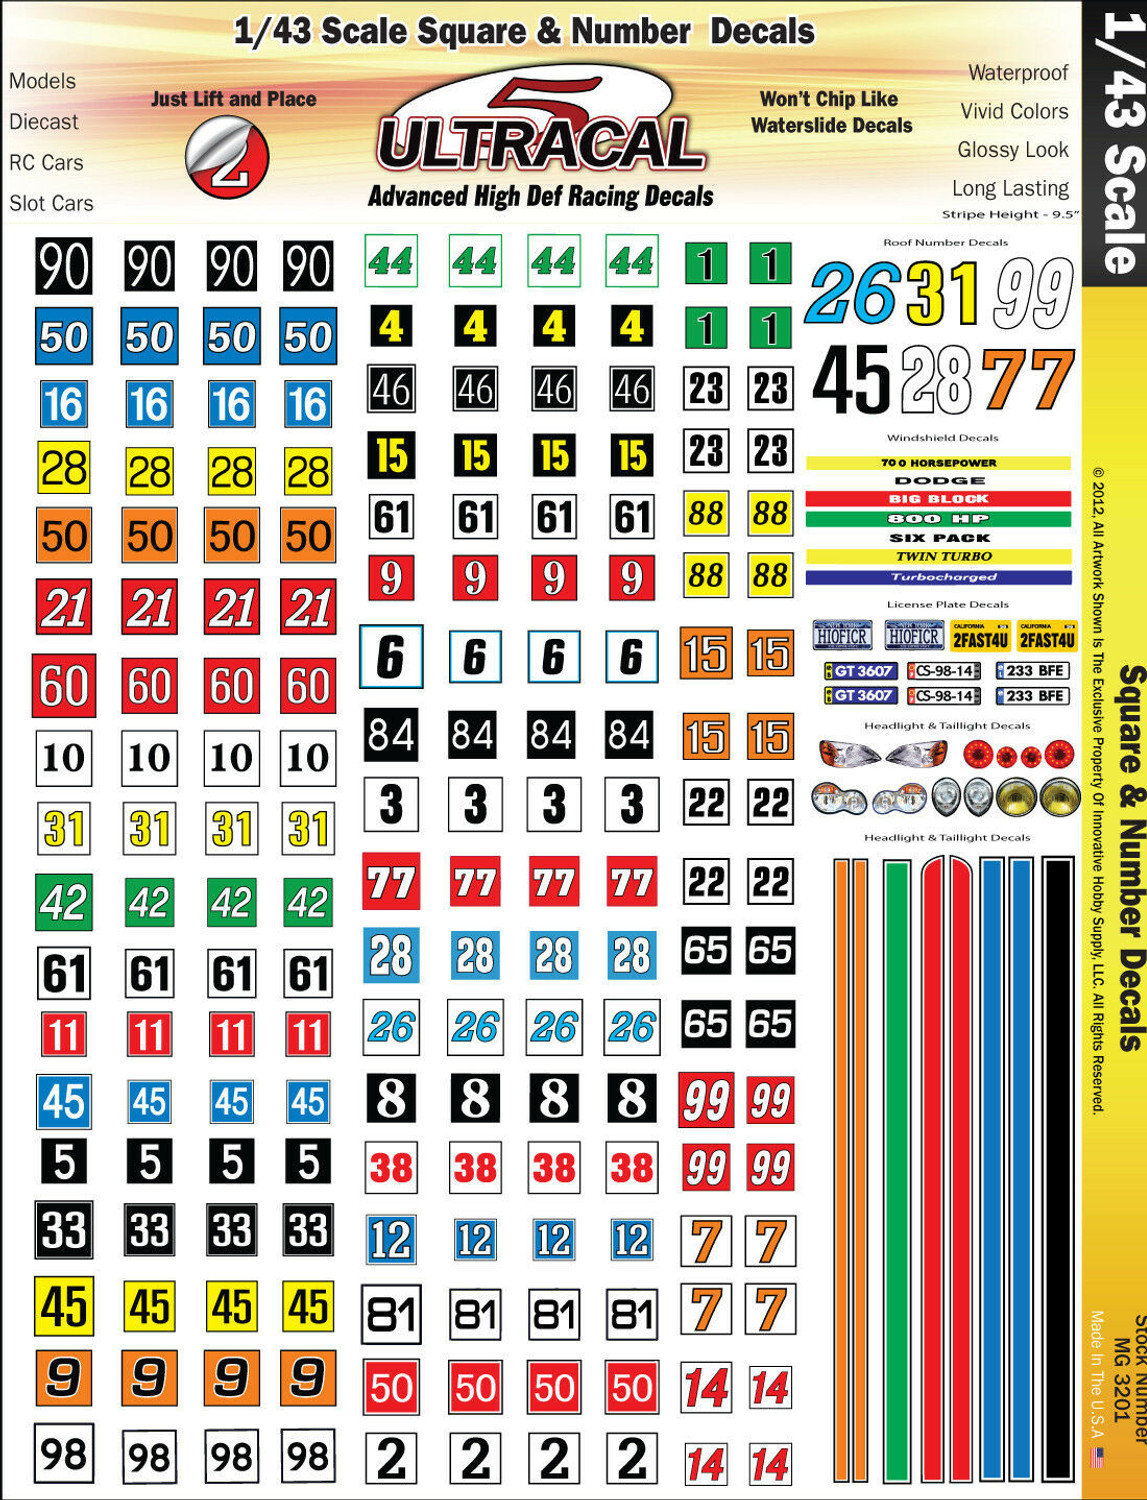 MG 3201 Ultracal Decals - Racing Number and Square Decals for 1/43 O Scale